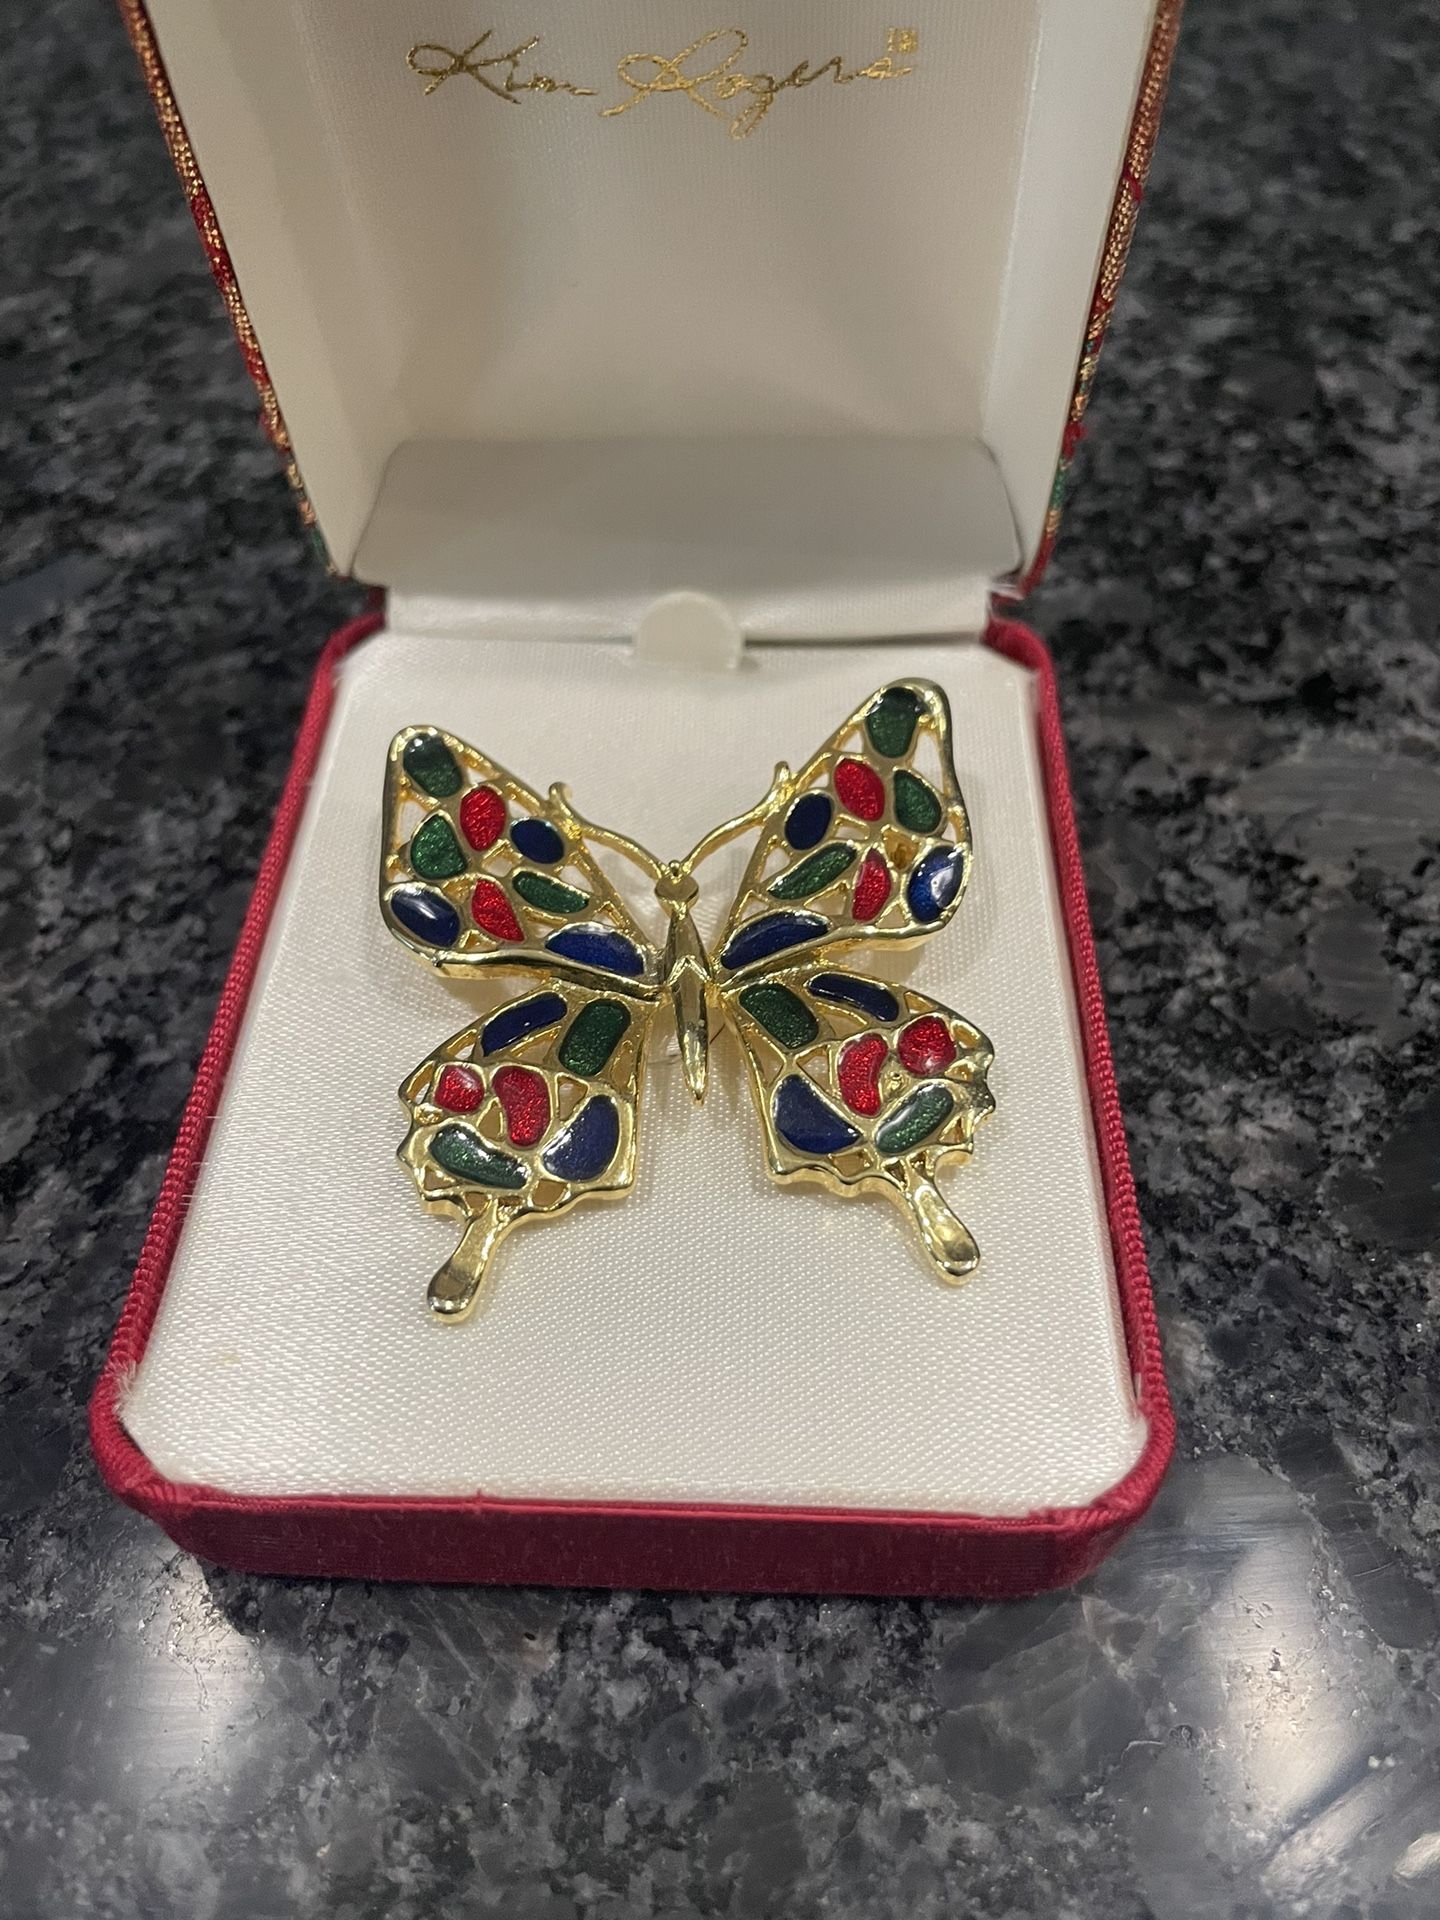 Vintage Kim Rogers Butterfly Brooch With Jewelry Box